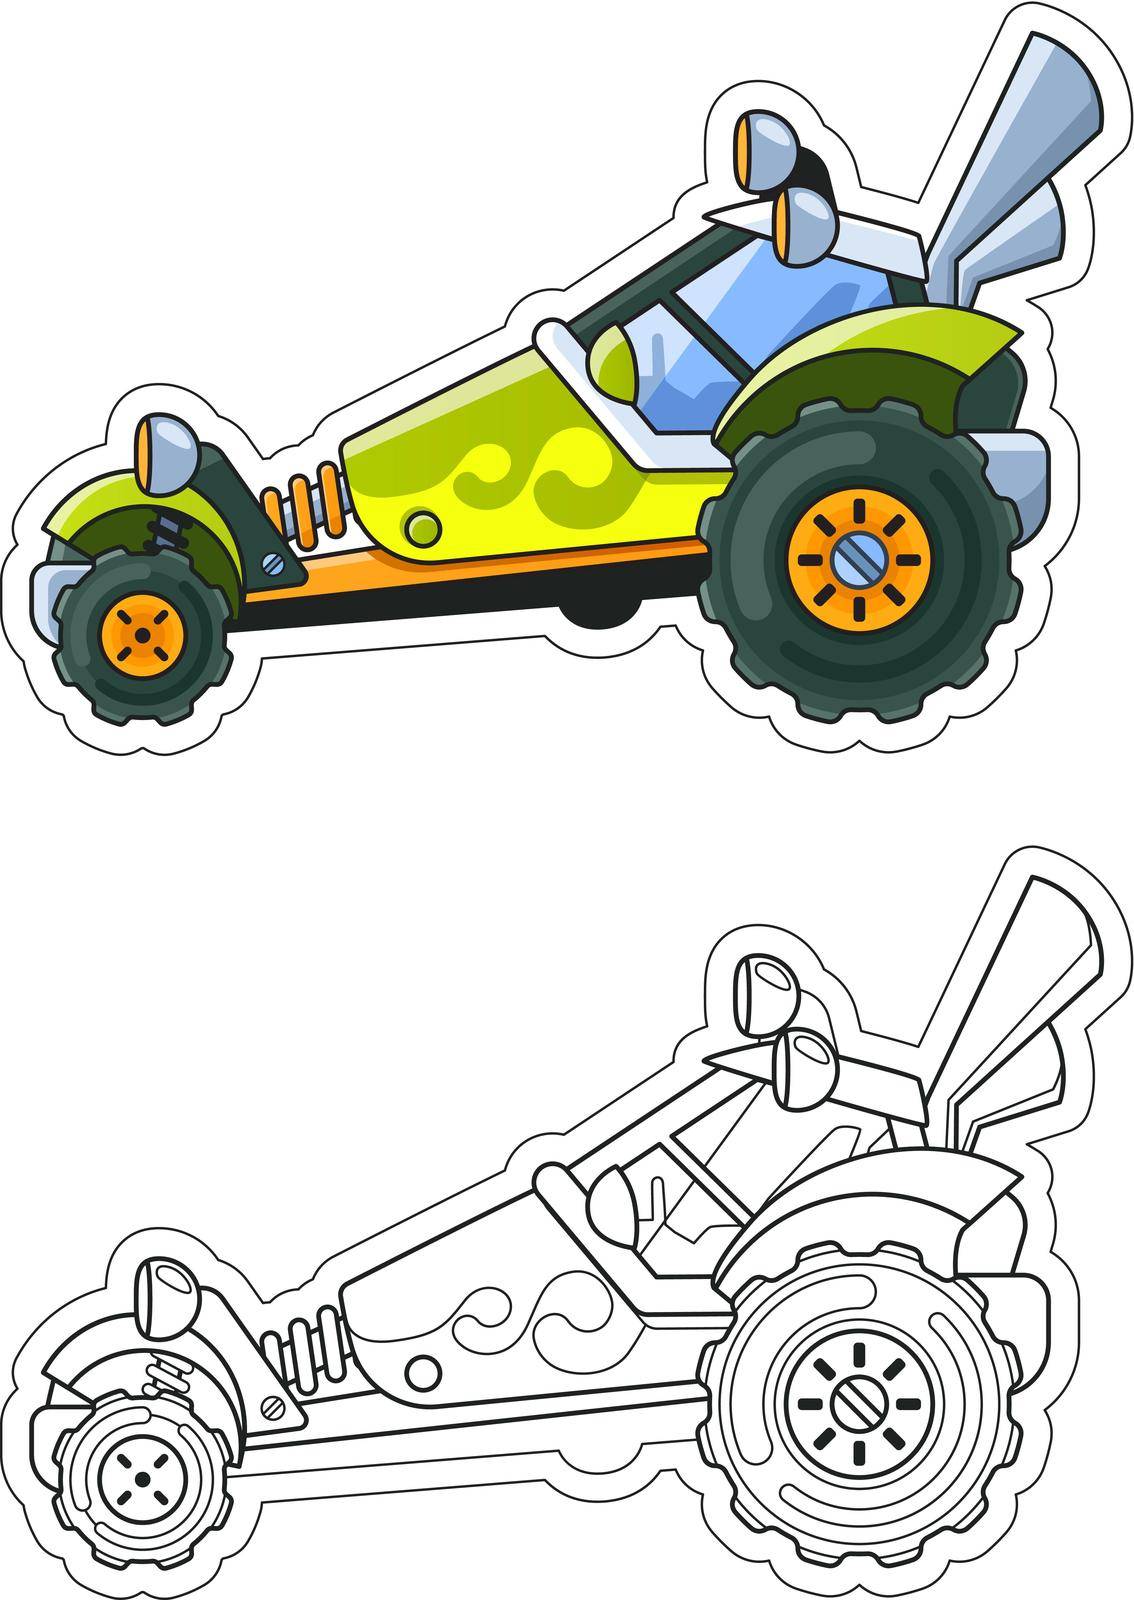 Green Buggy Side View Coloring Book. Colored Version and Line Art. by vmalafeevskiy